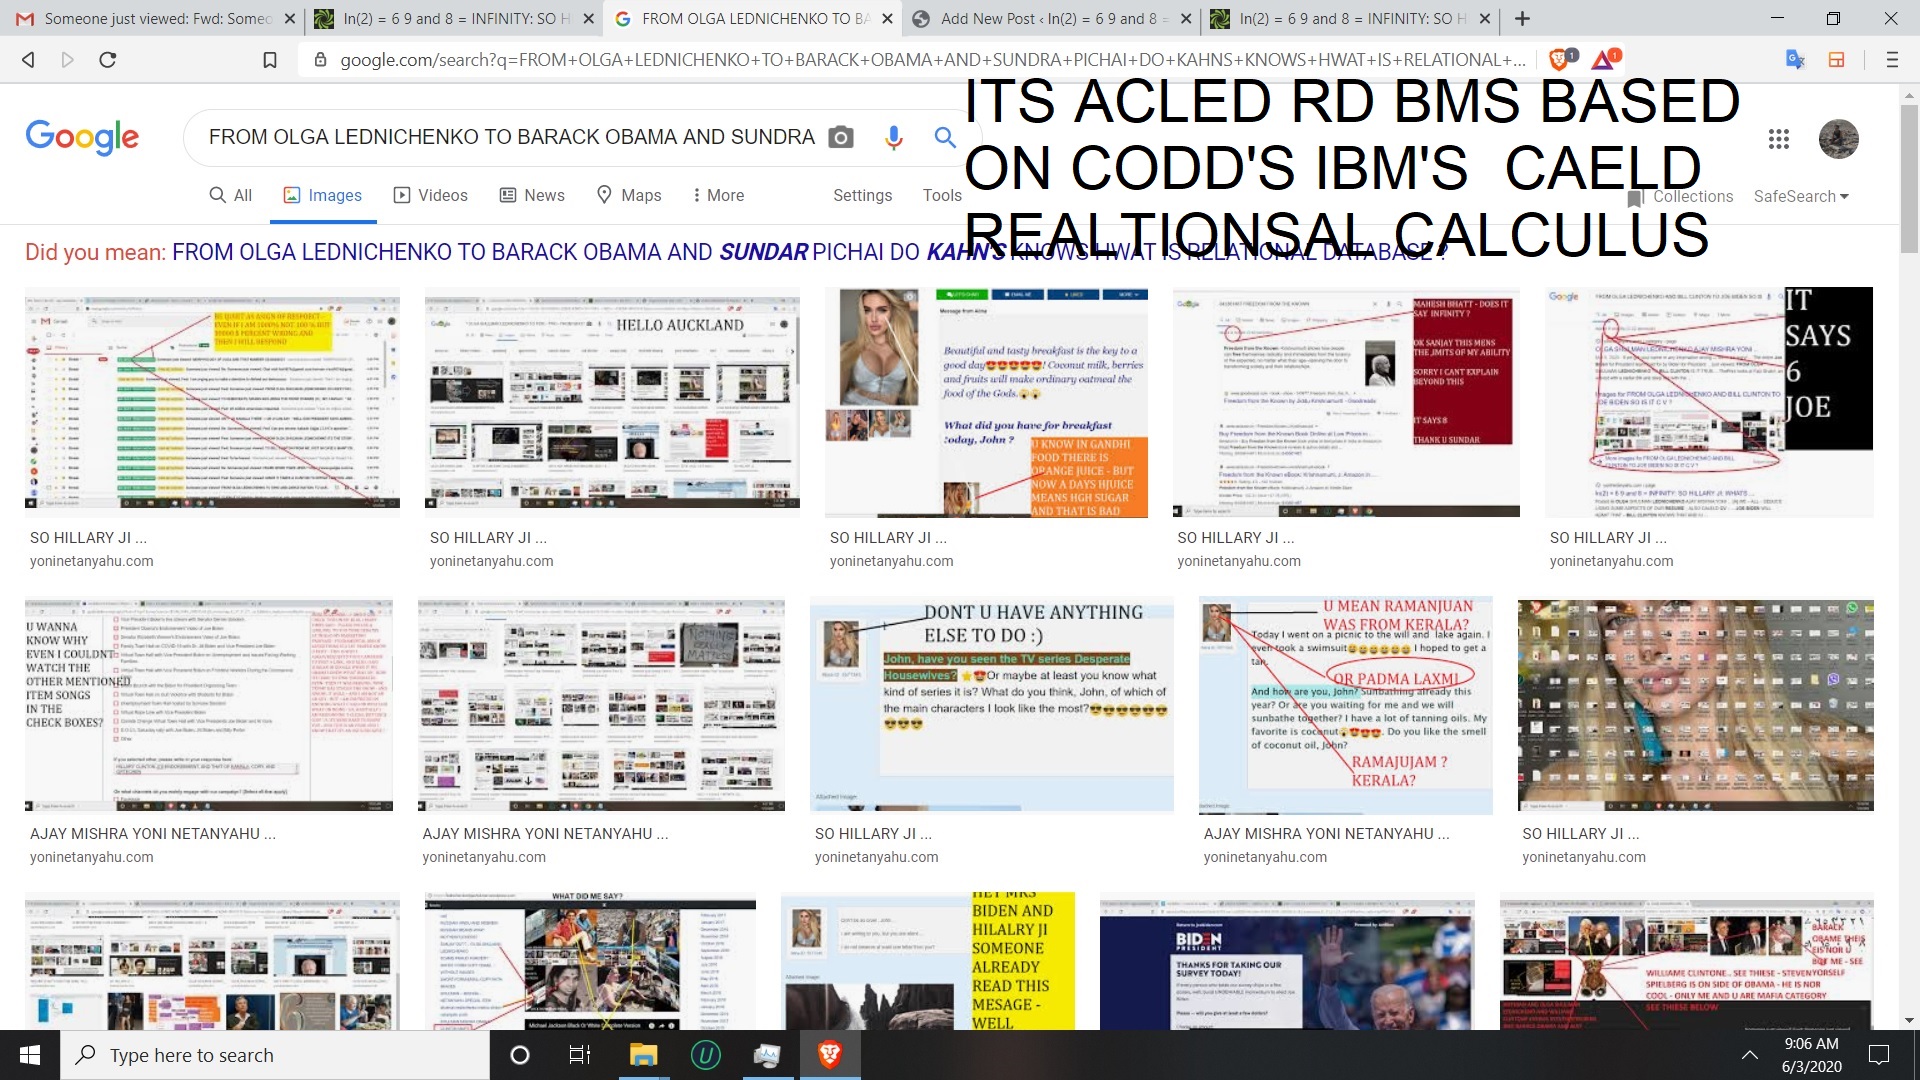 ITS ACLED RD BMA ALSO CAELD REALTIONSAL CALCULUS